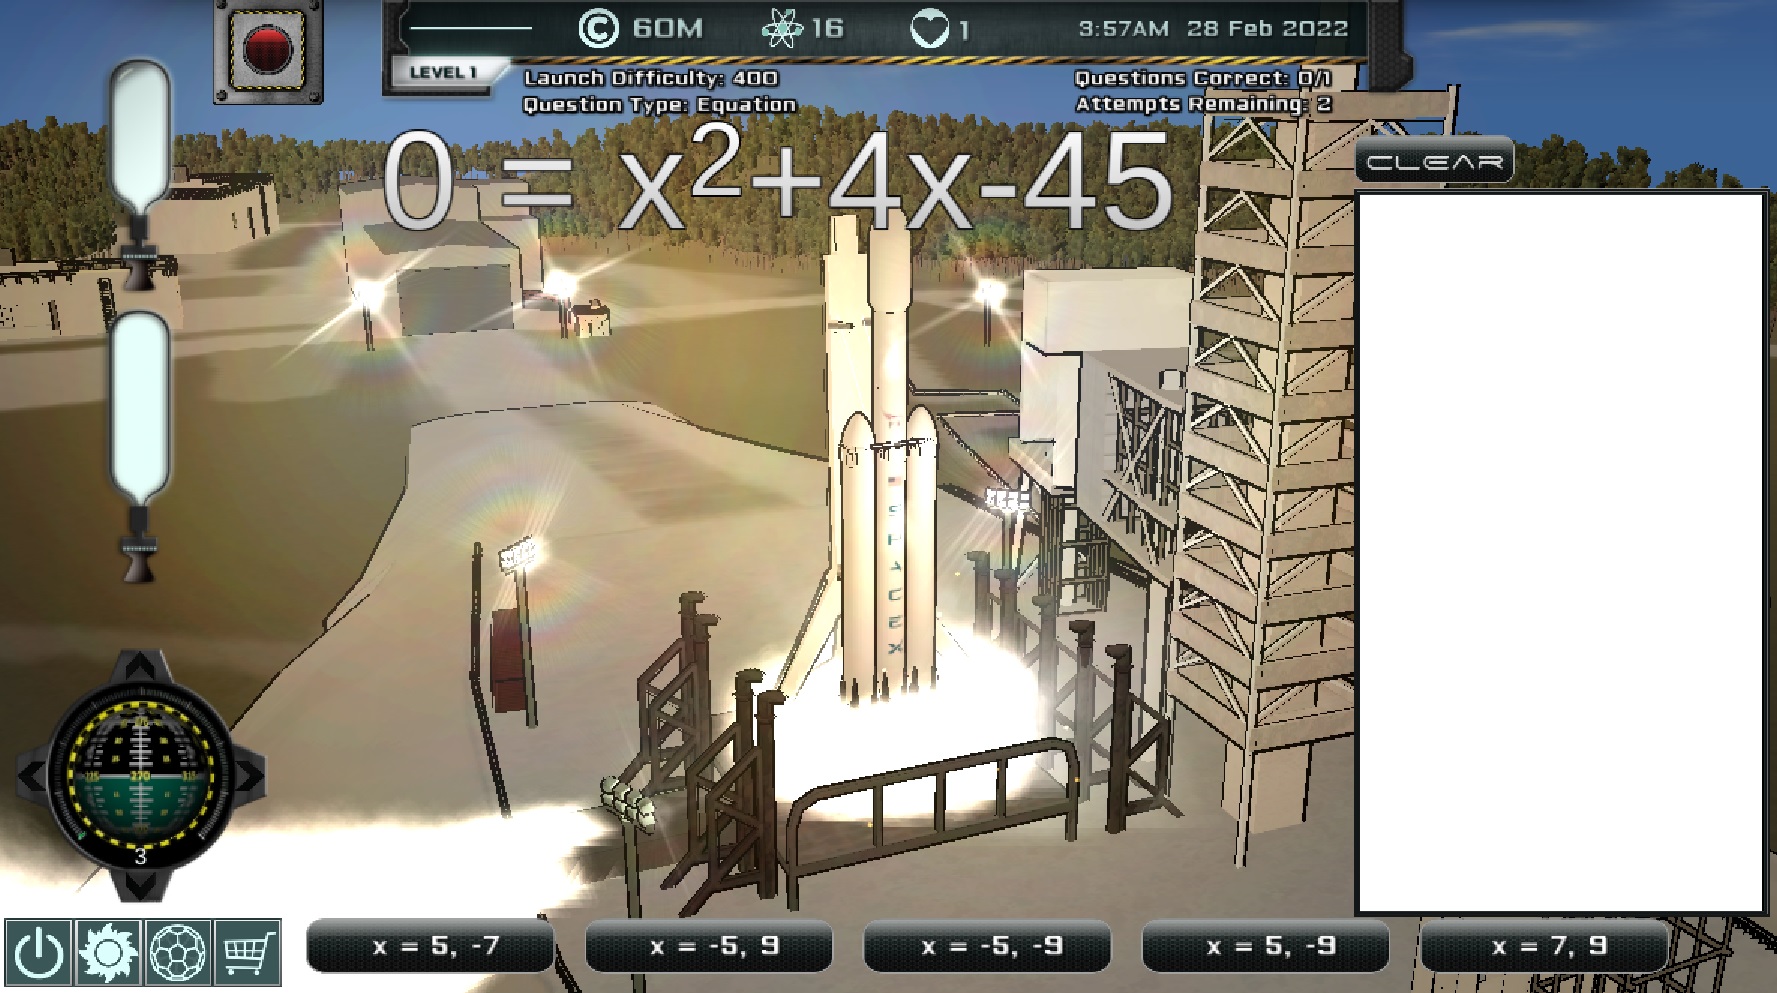 Intergalactic Education gameplay aligned to Common Core standards launchpad rocket quadratic equation